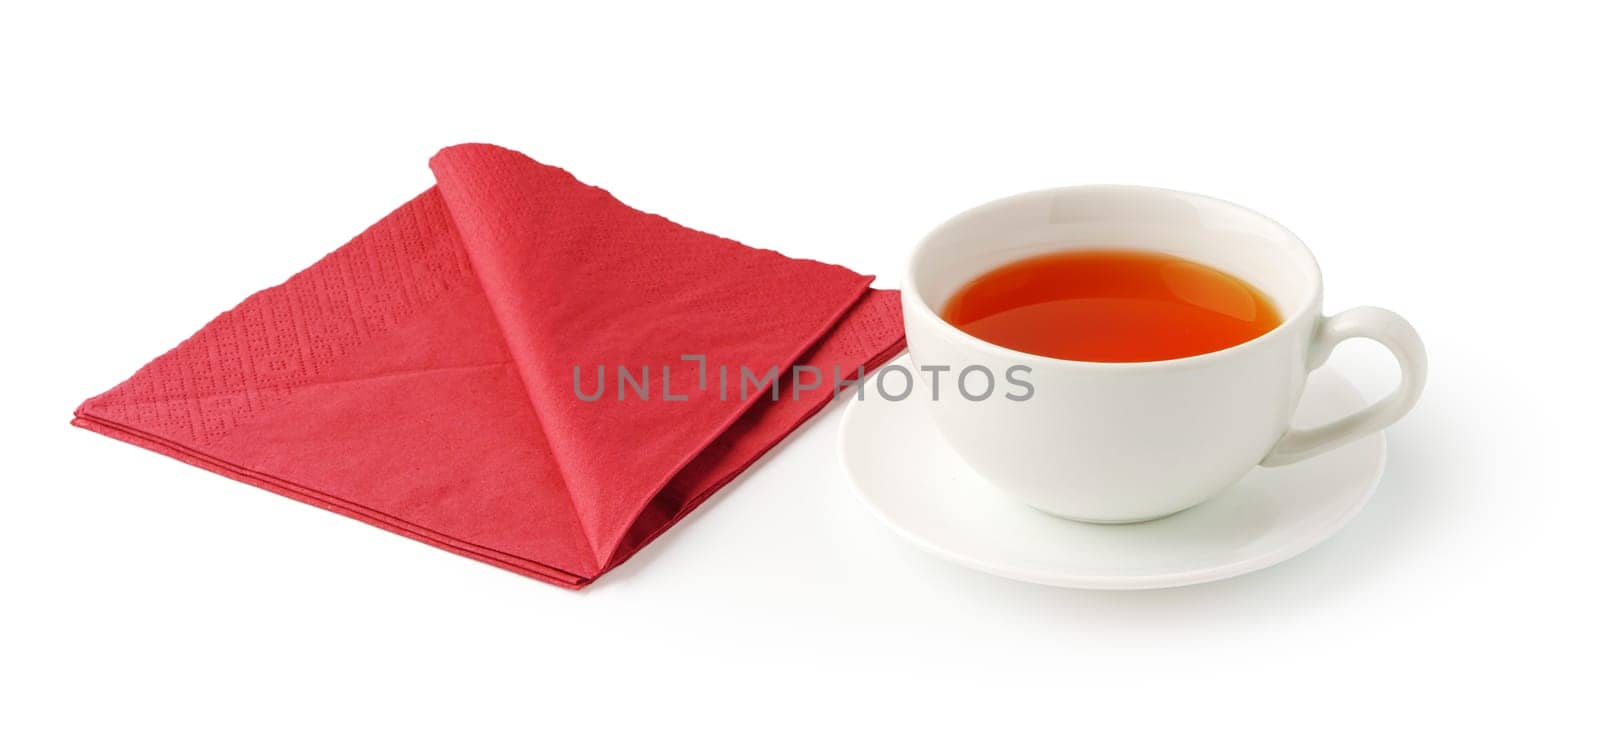 Cup of tea and paper napkin on white background by Fabrikasimf